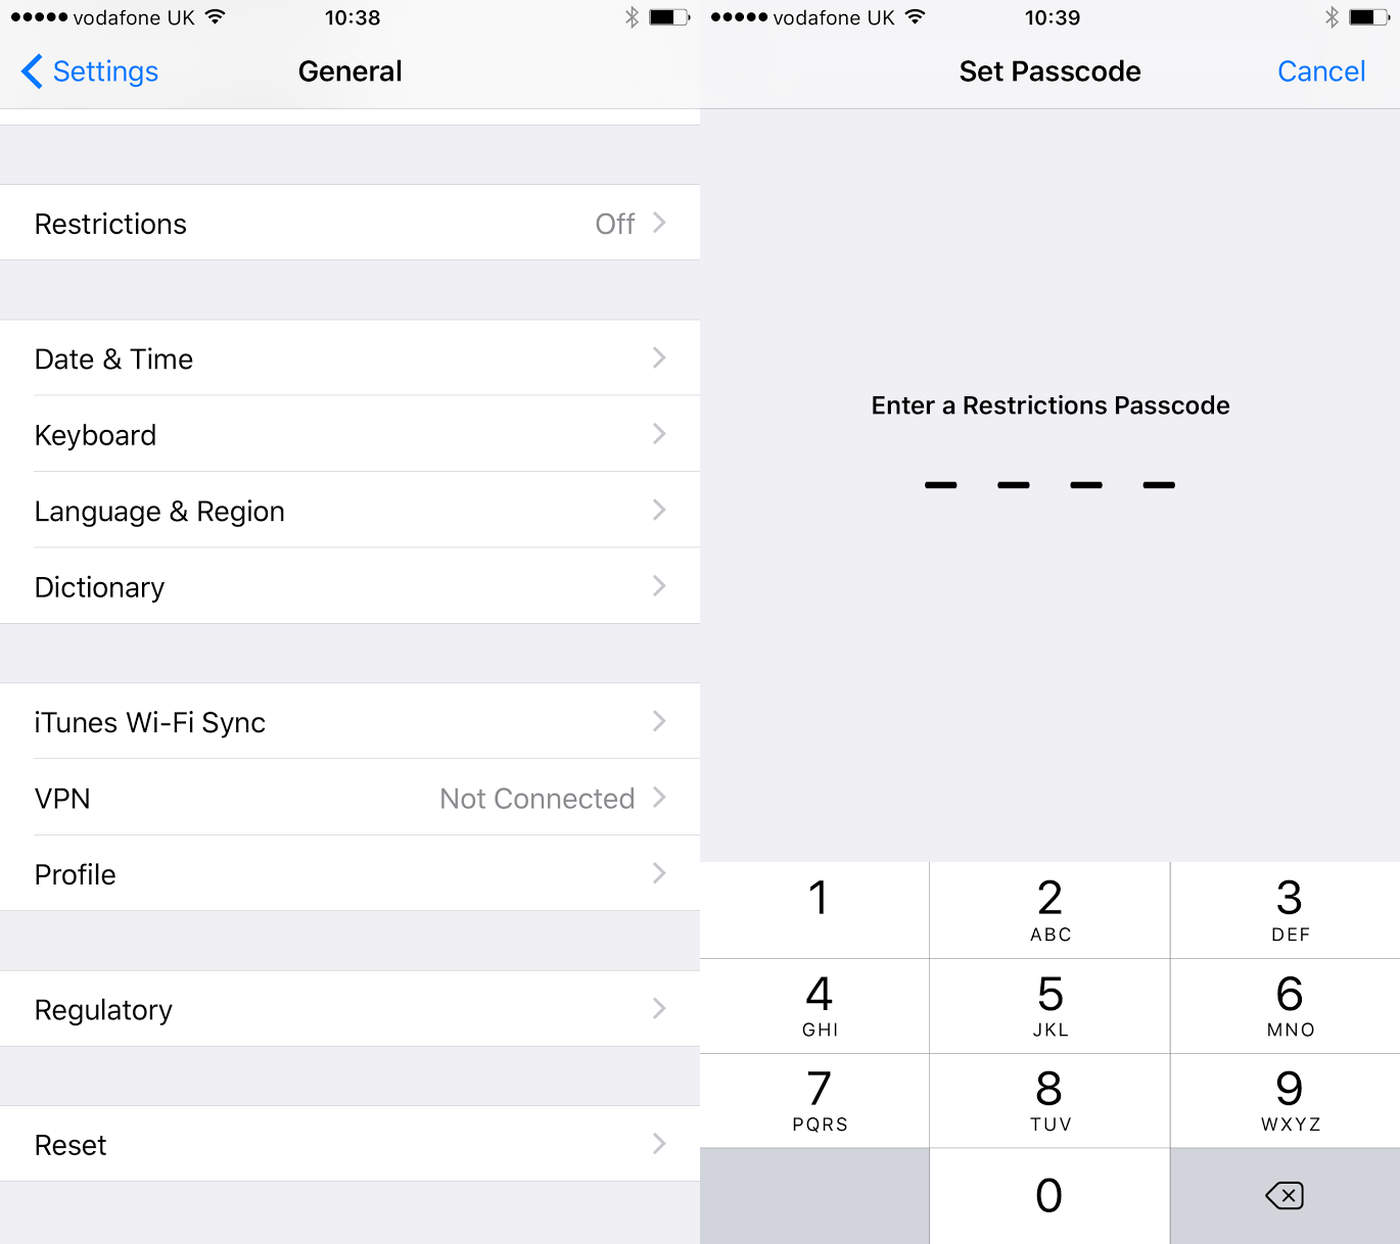 iphone backup extractor restrictions passcode free